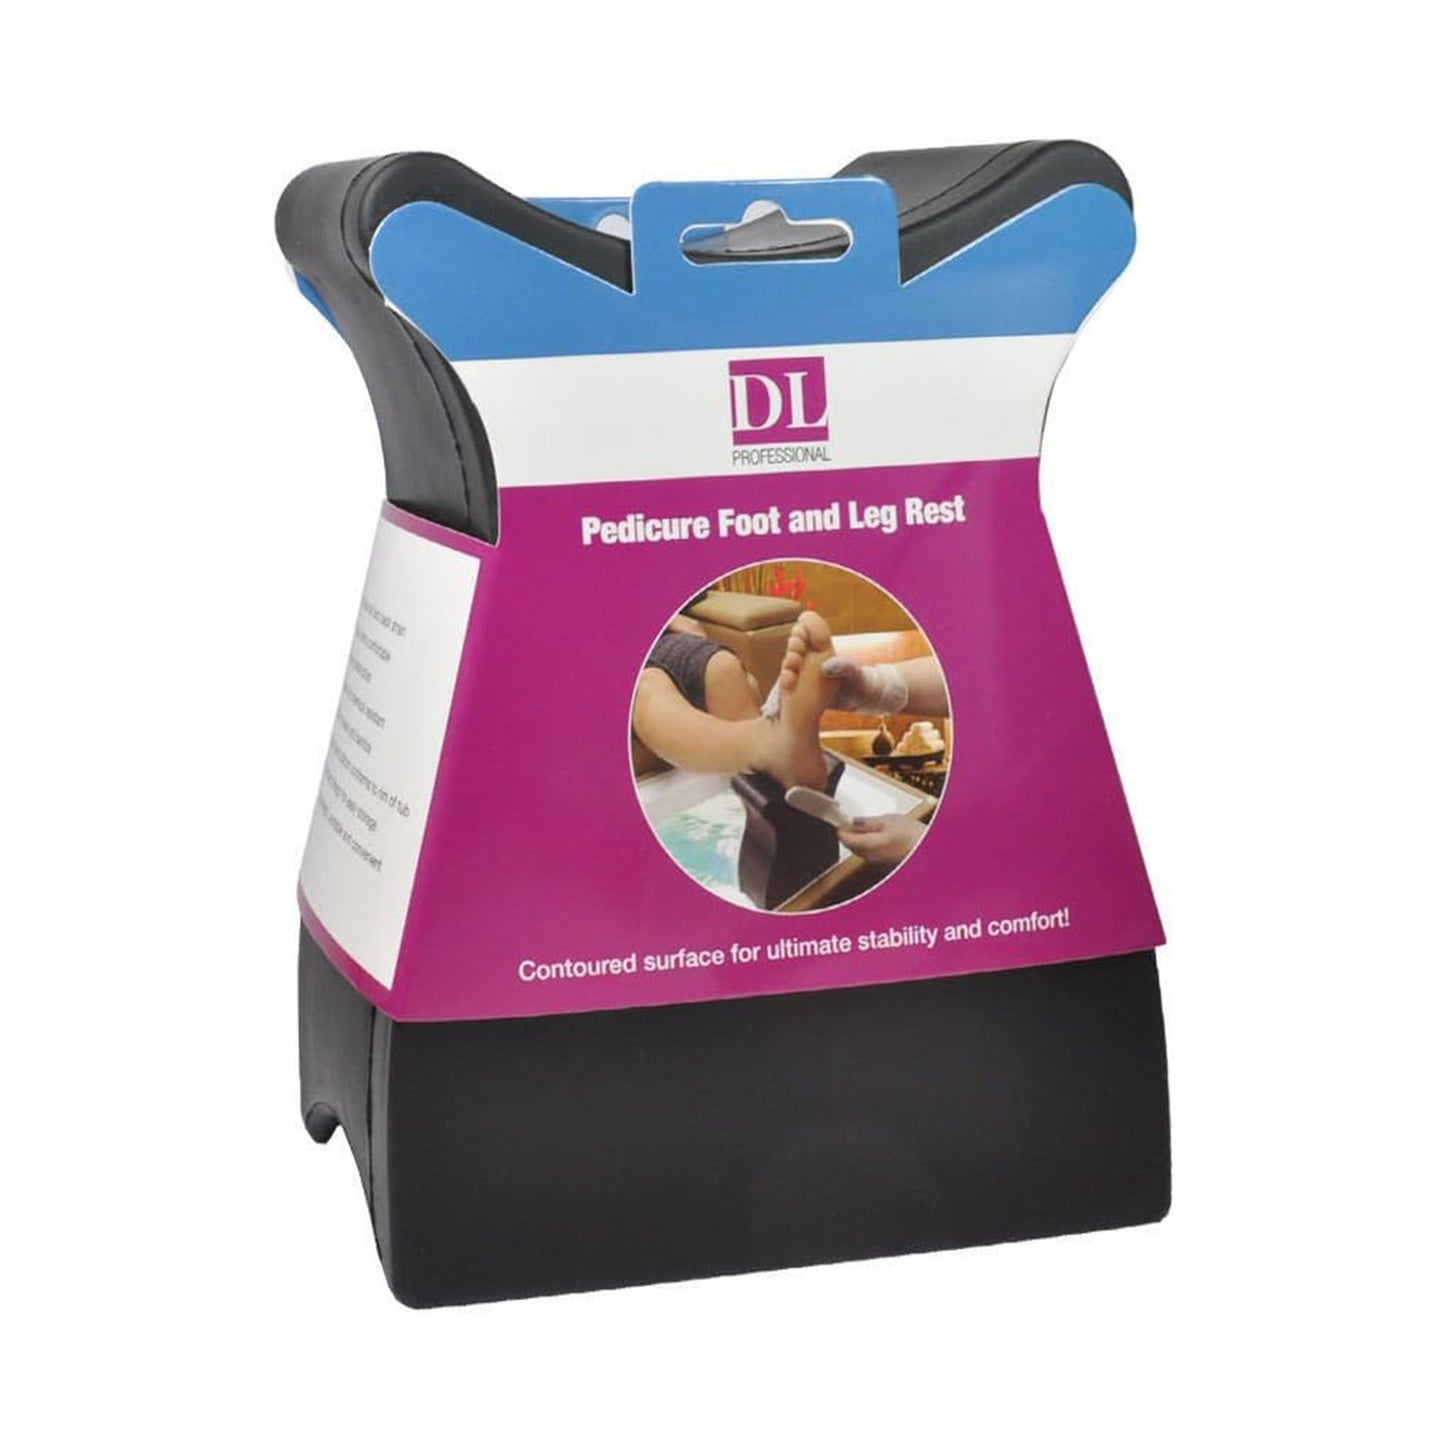 Other Products - DL Professional Pedicare Foot and Leg Rest